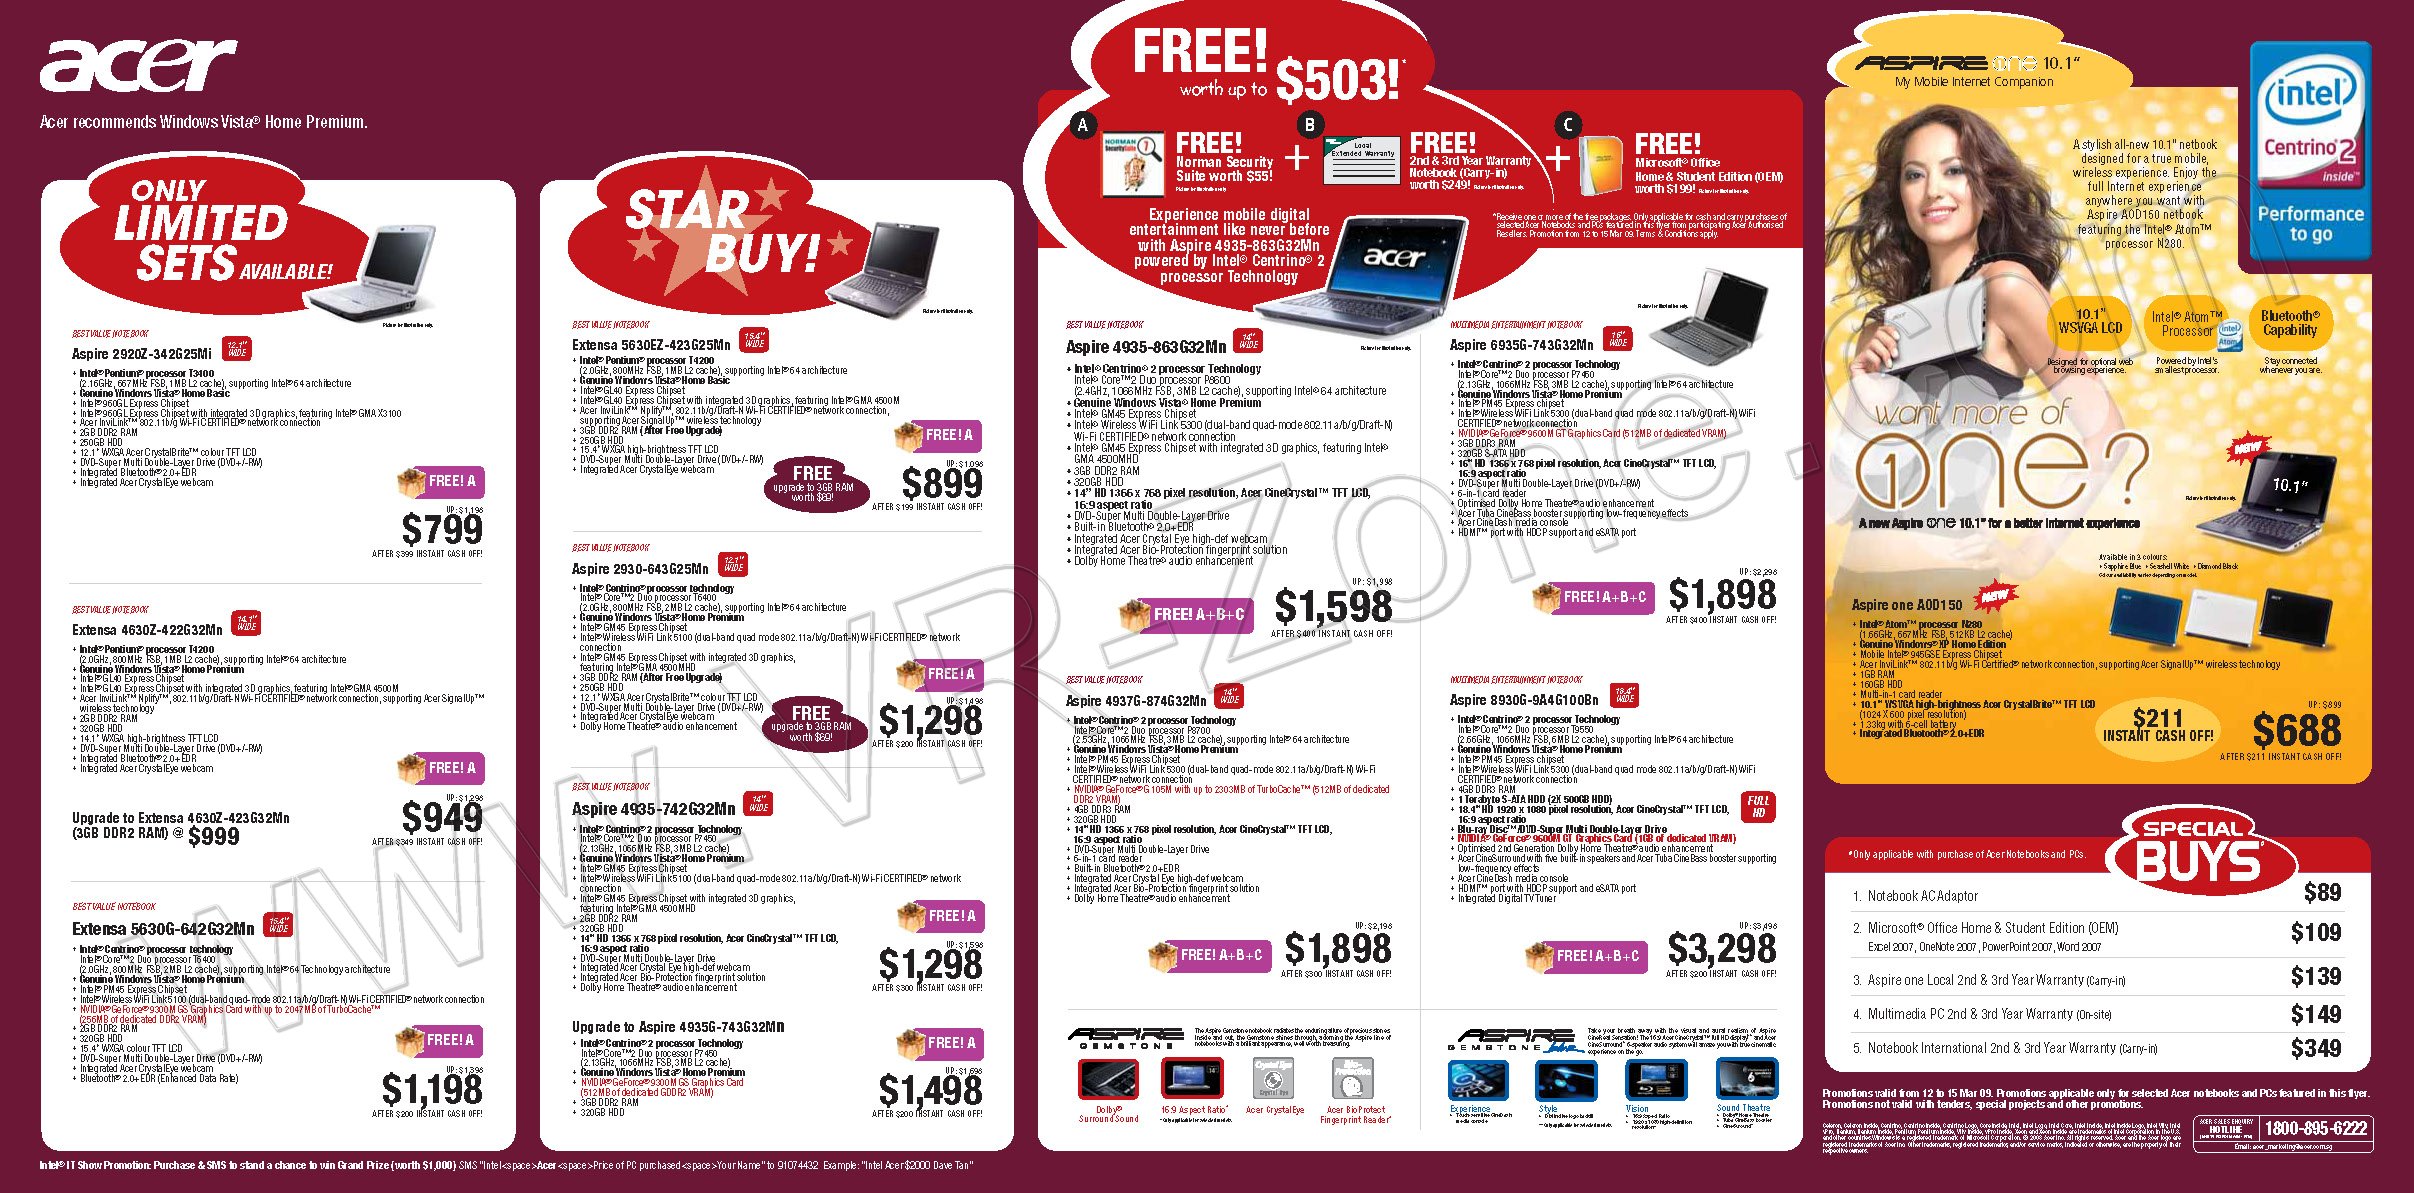 IT Show 2009 price list image brochure of Acer 2 VR-Zone